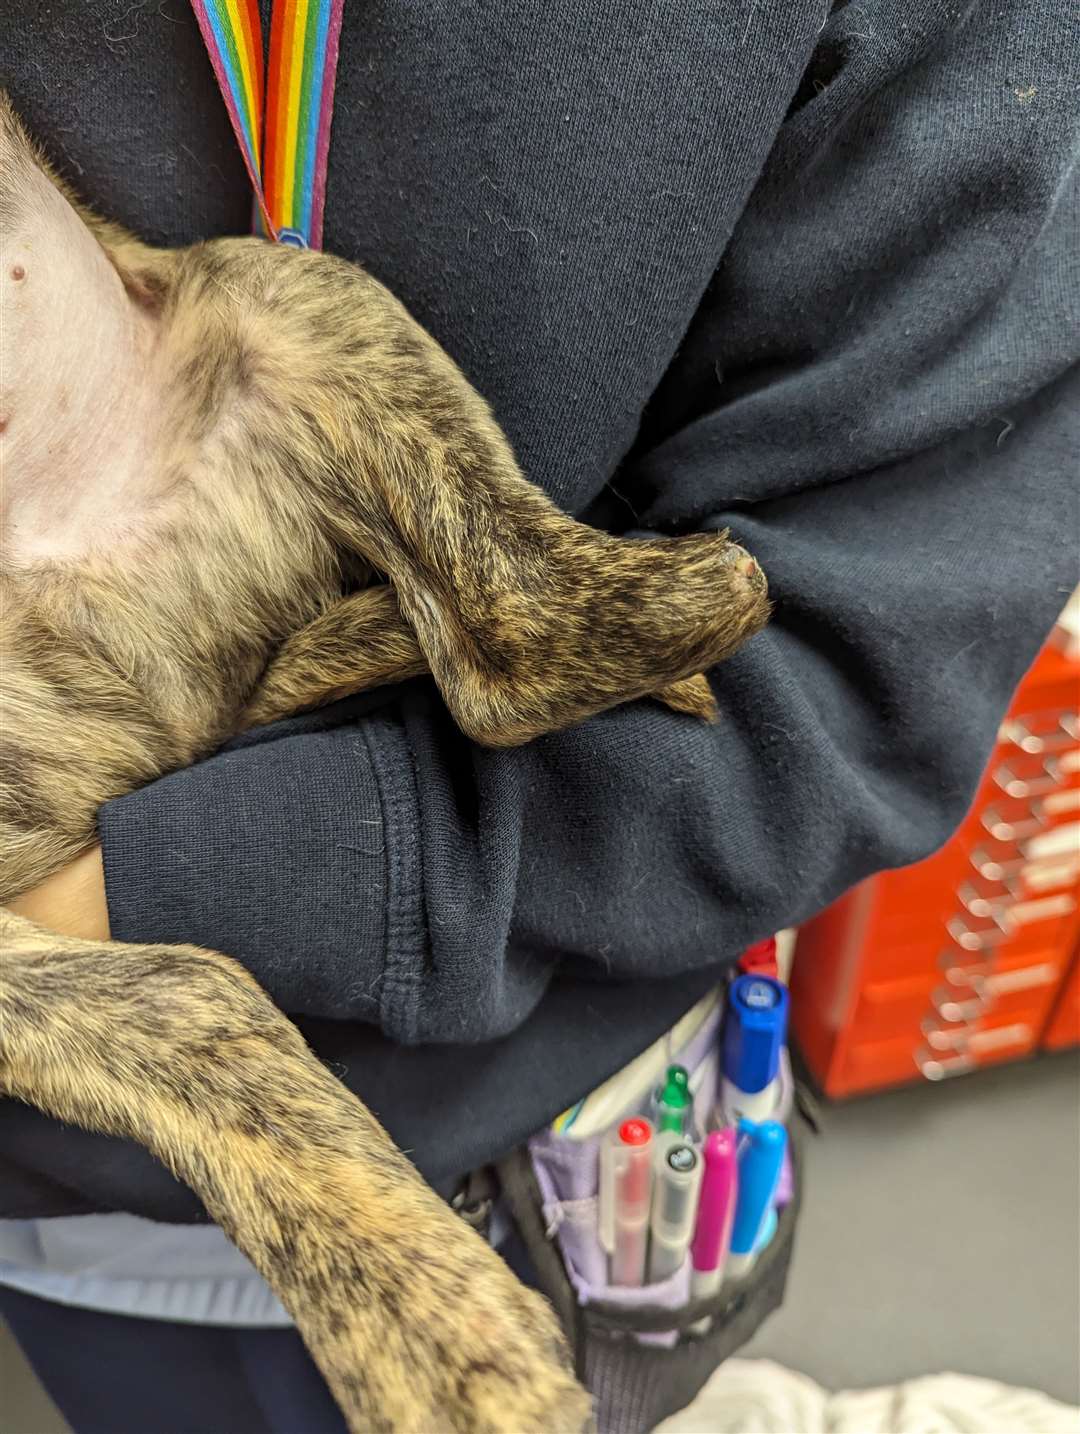 The puppy is believed to have a deformity and is missing a paw and part of his rear leg (RSPCA/PA)